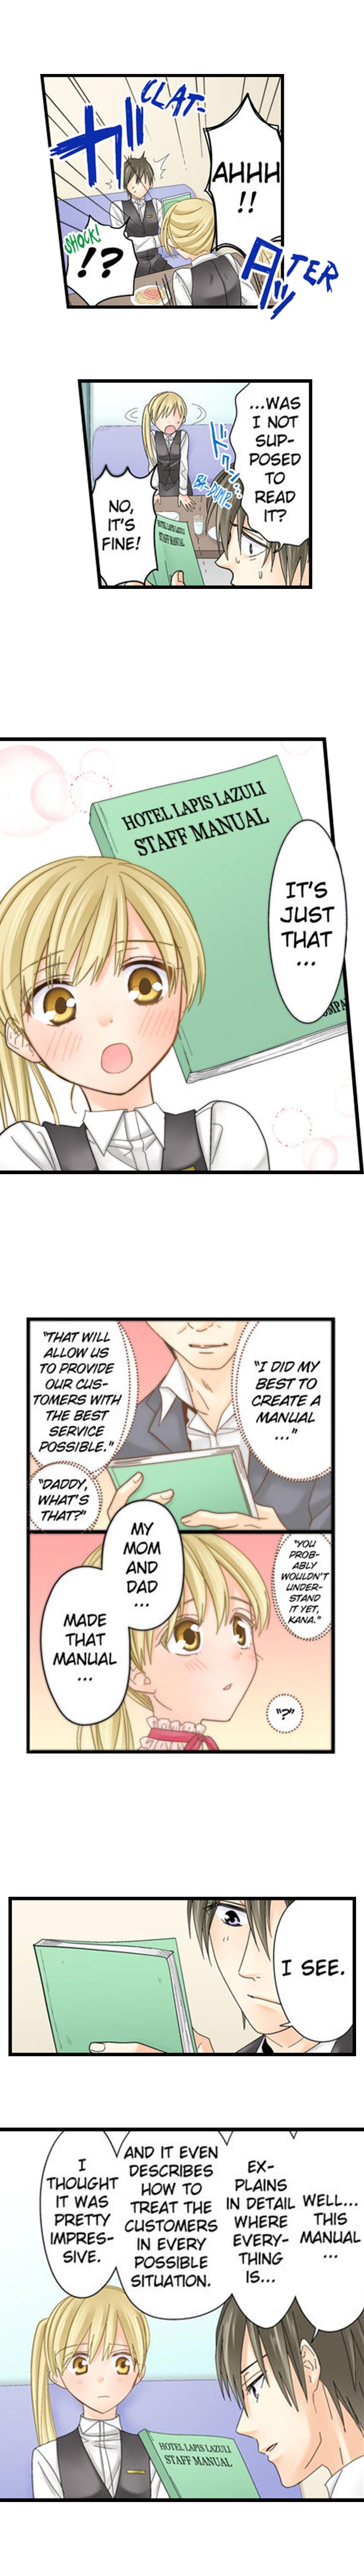 Running a Love Hotel with My Math Teacher - Chapter 11 Page 4